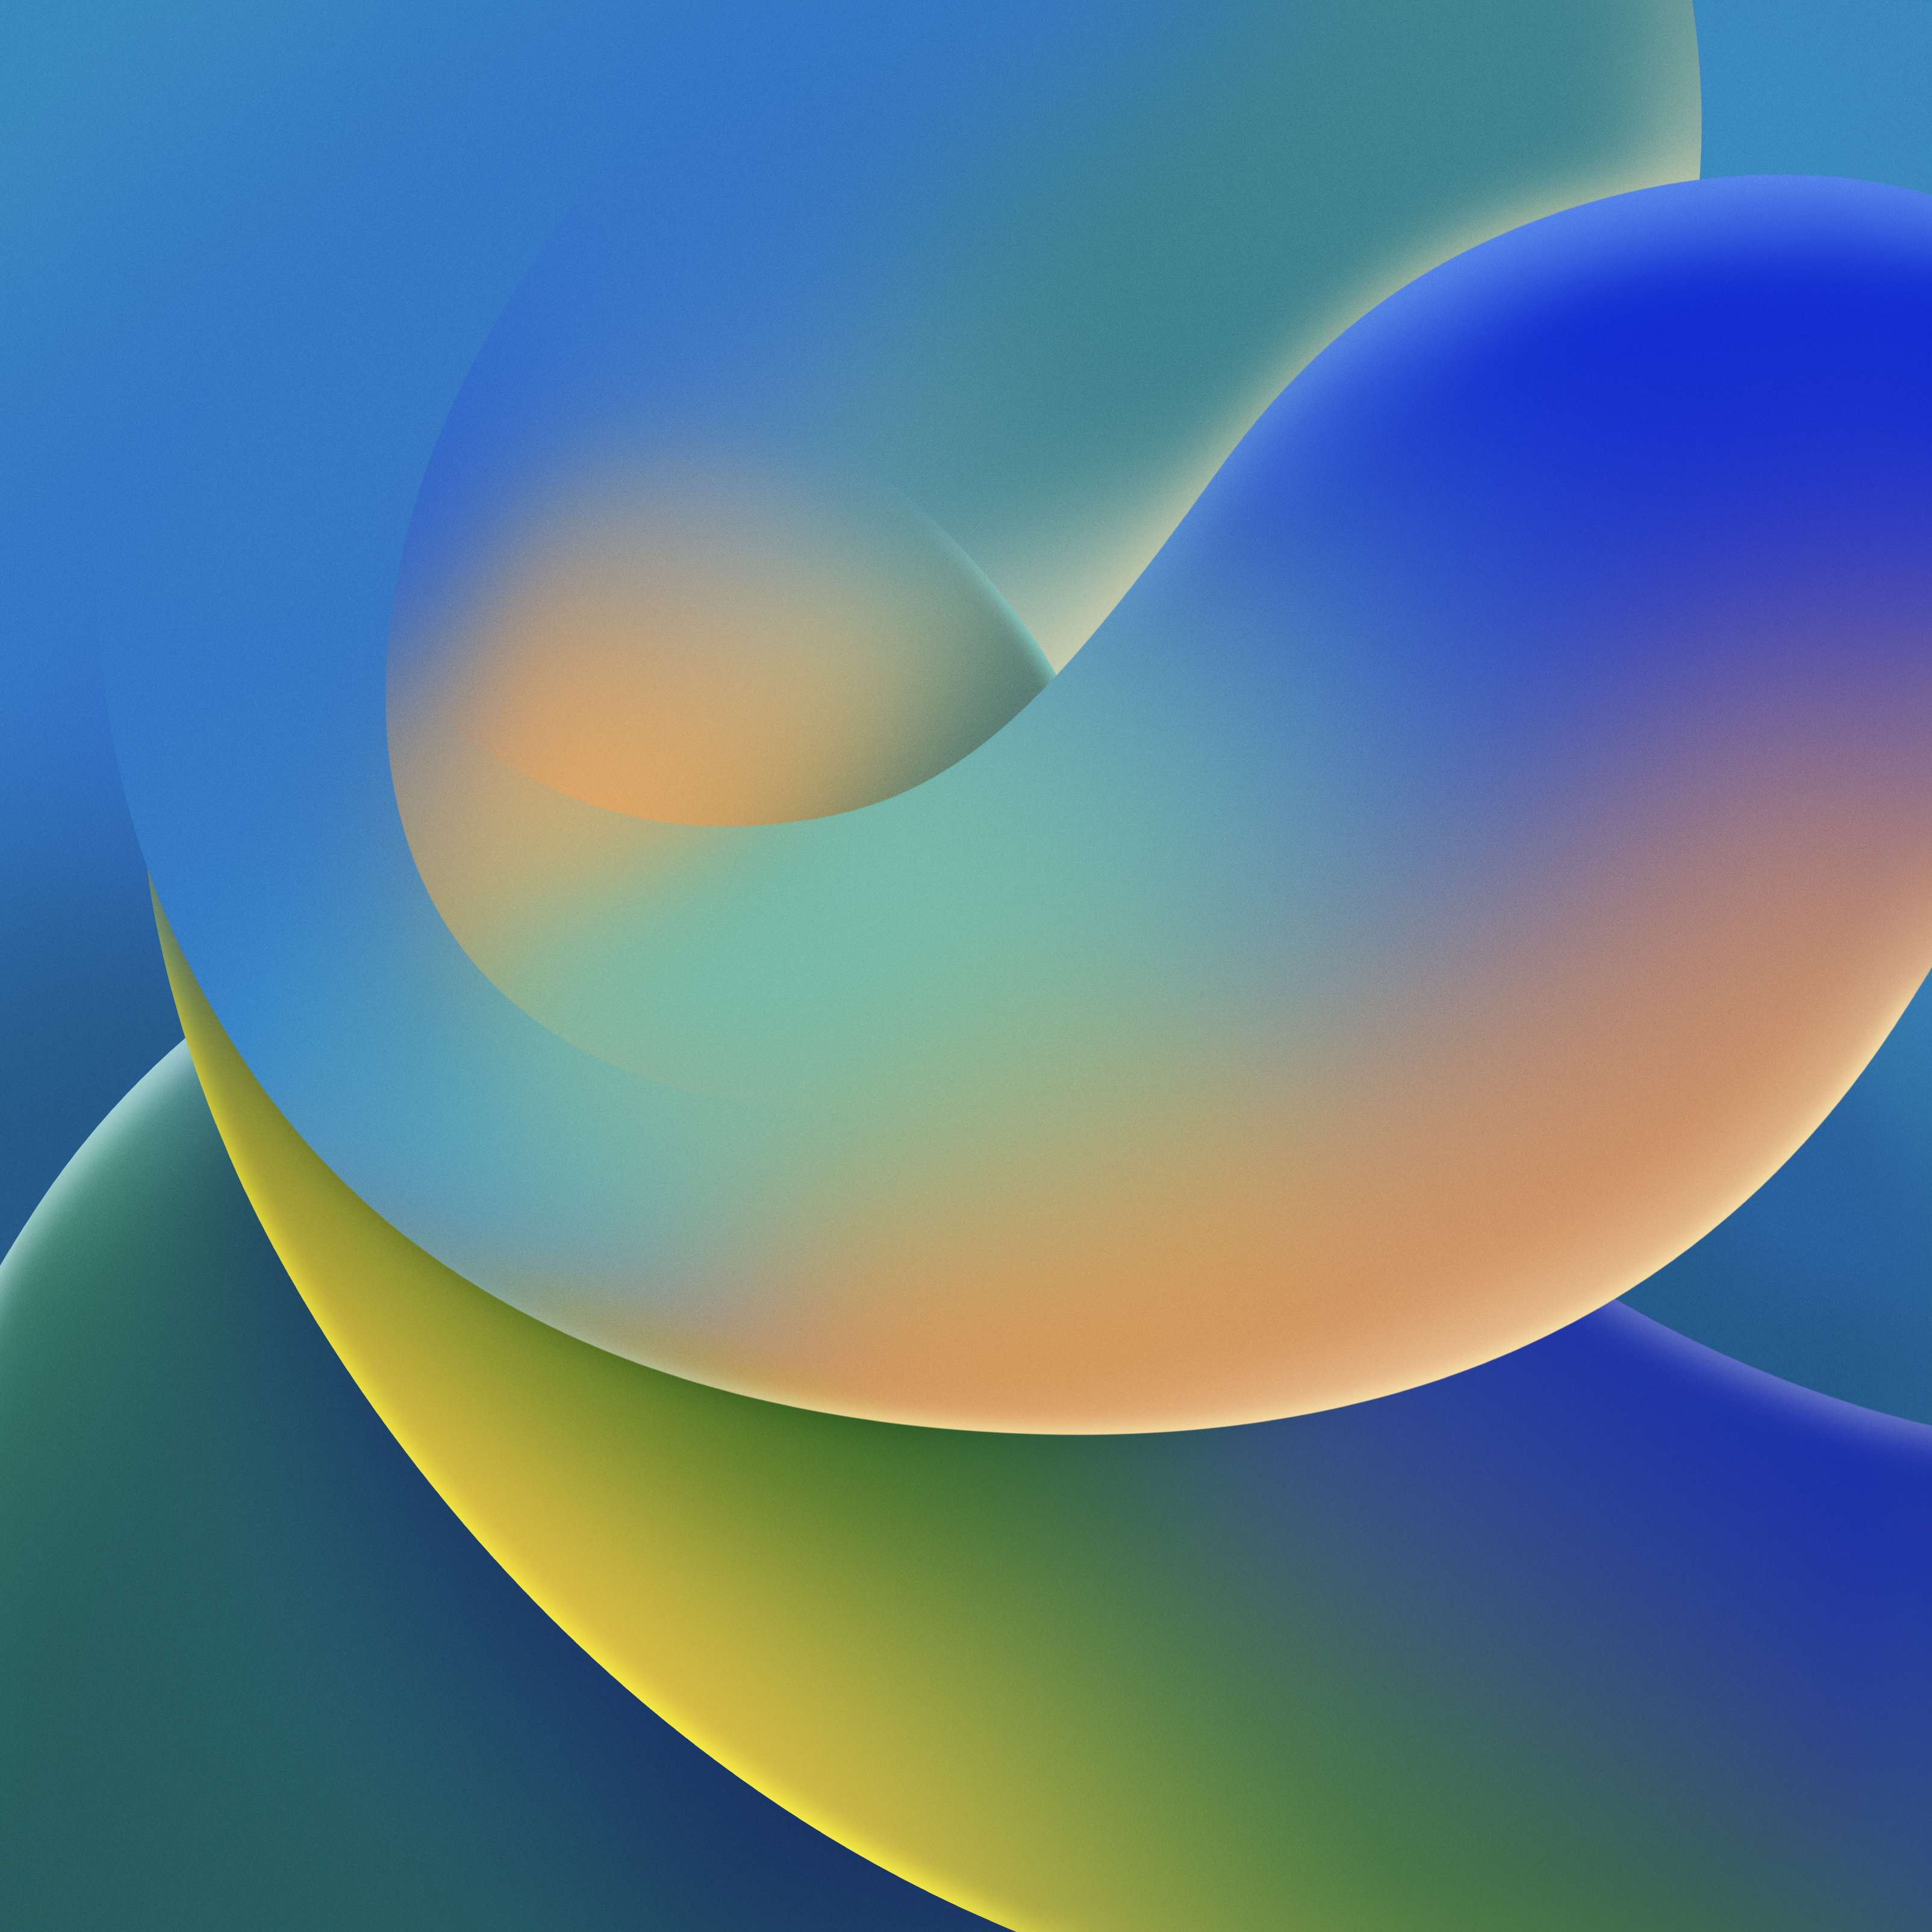 General 3208x3208 digital art abstract blue background waveforms iOS colorful